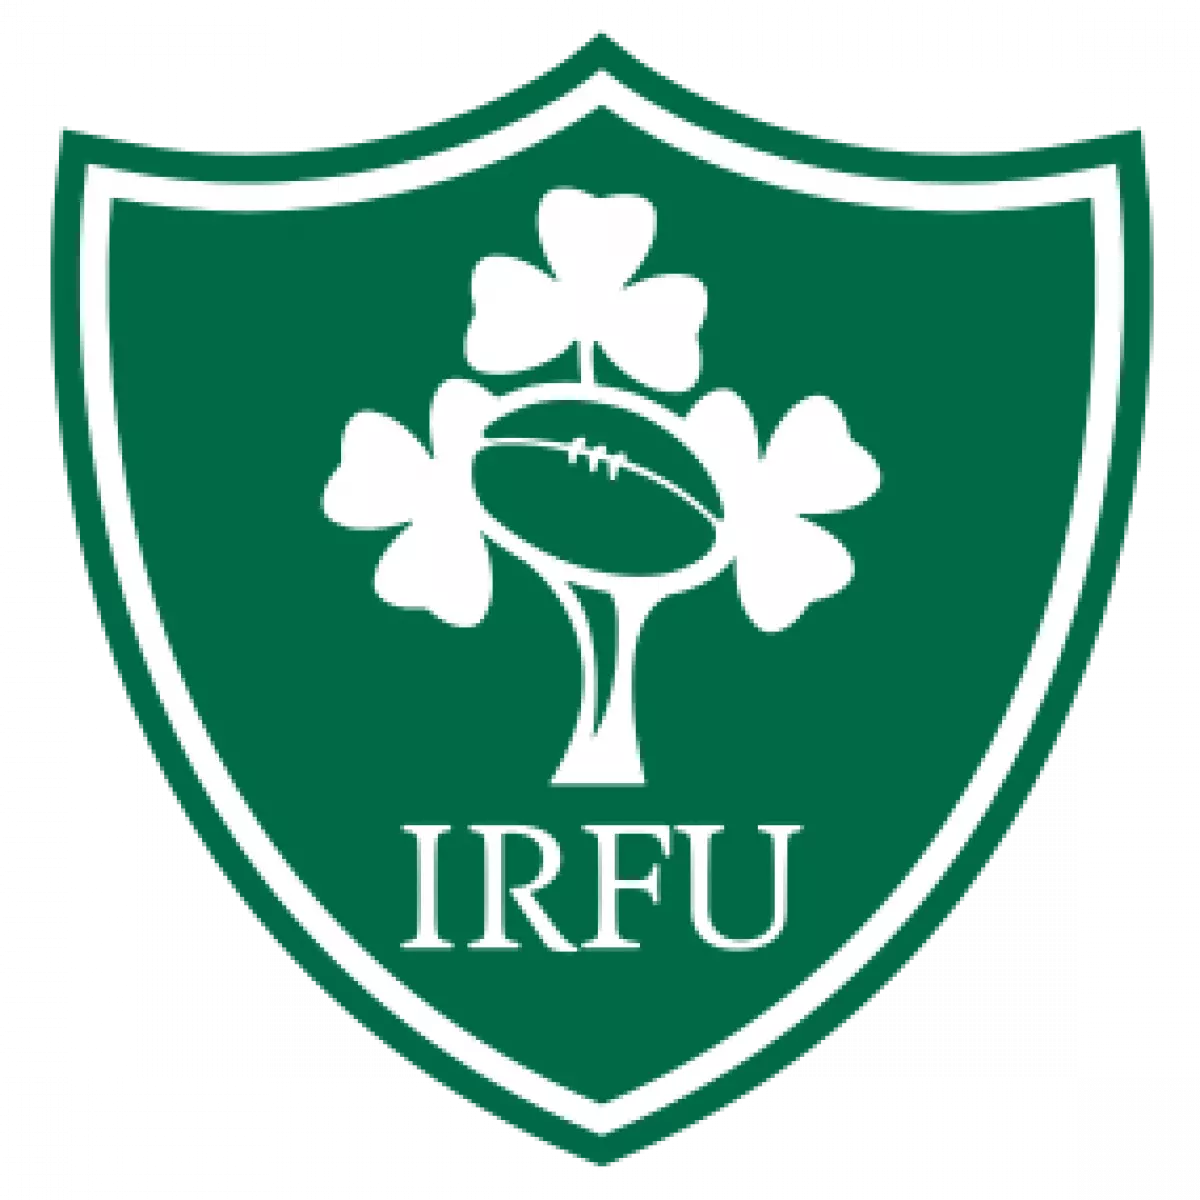 Ireland national rugby union team